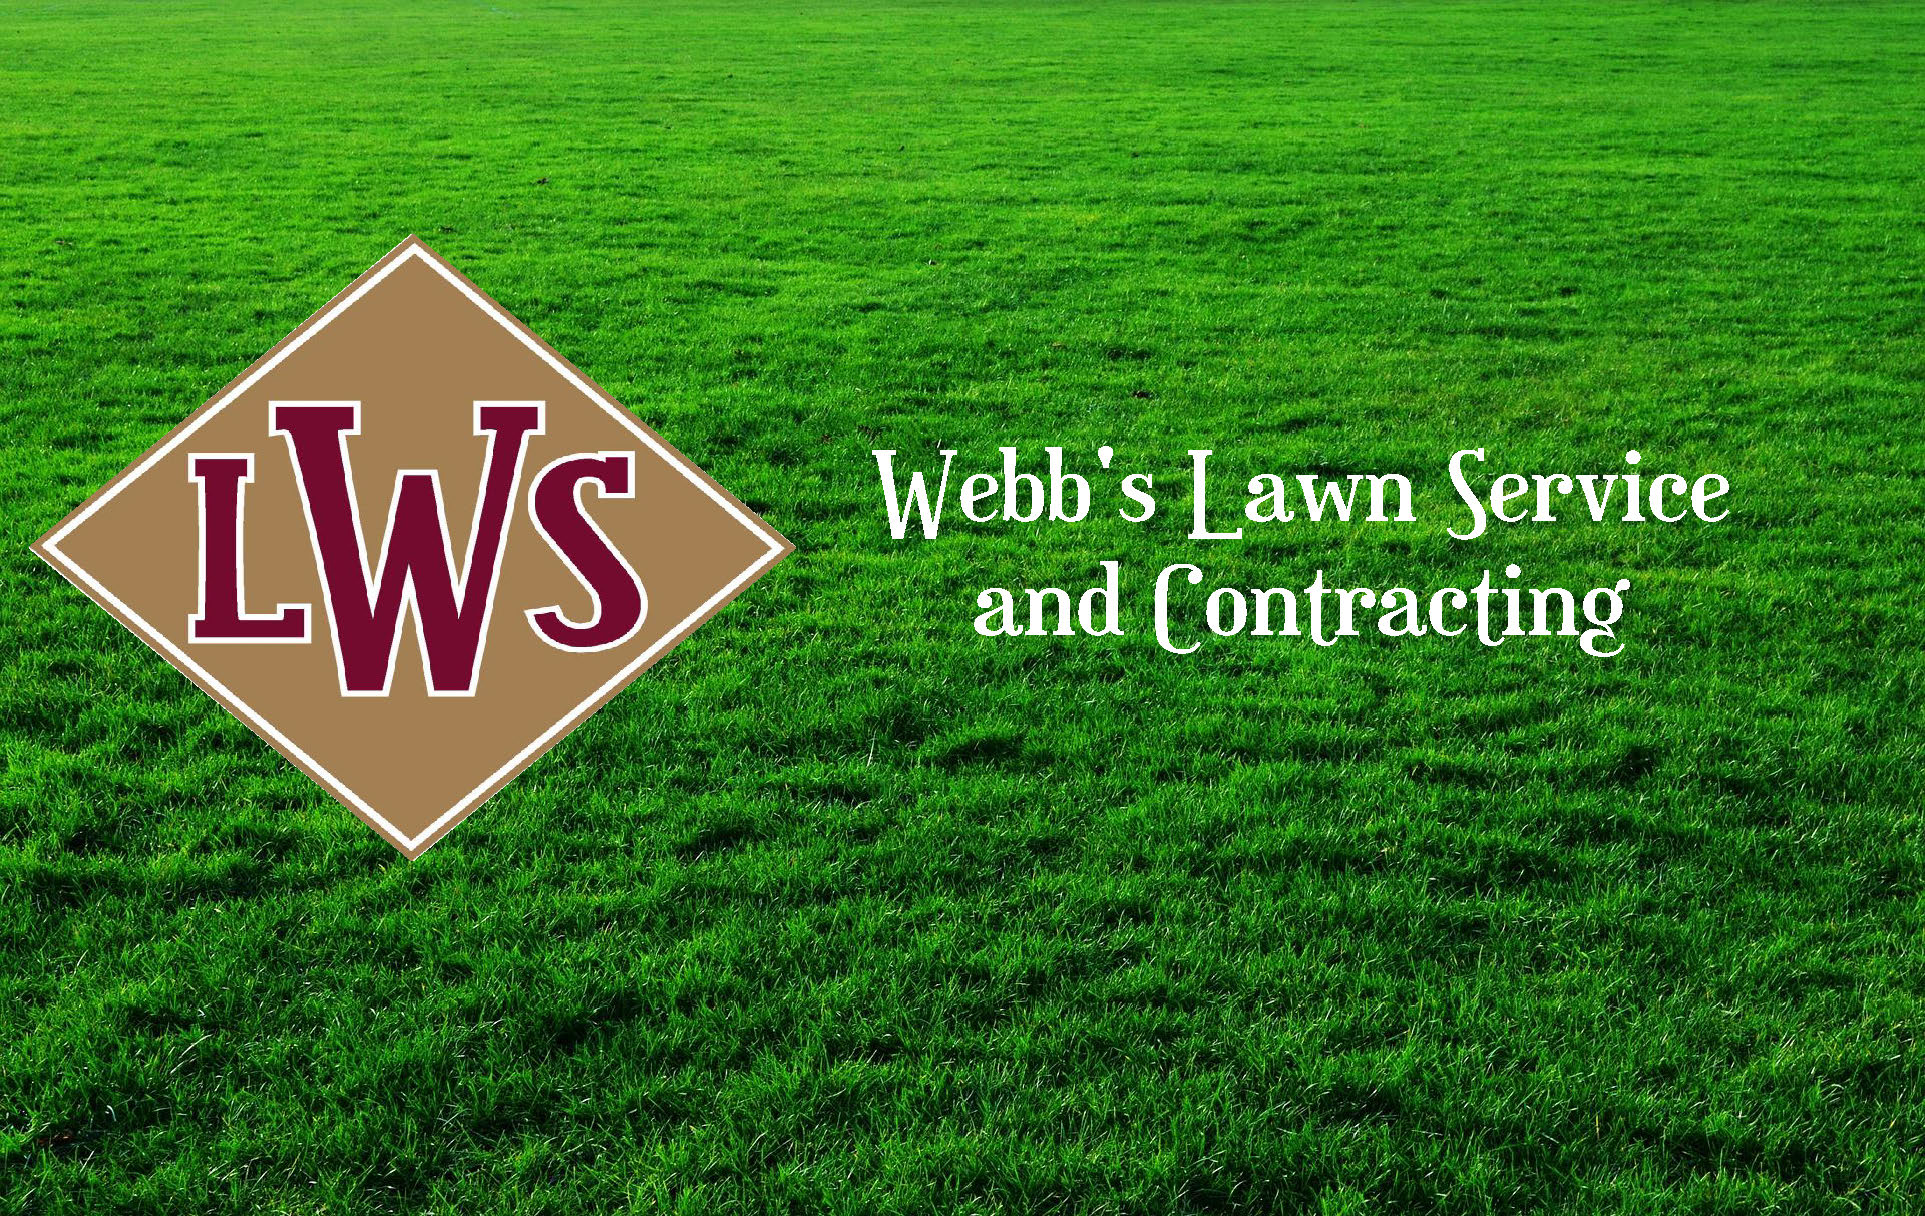 Webb's Lawn Service and Contracting